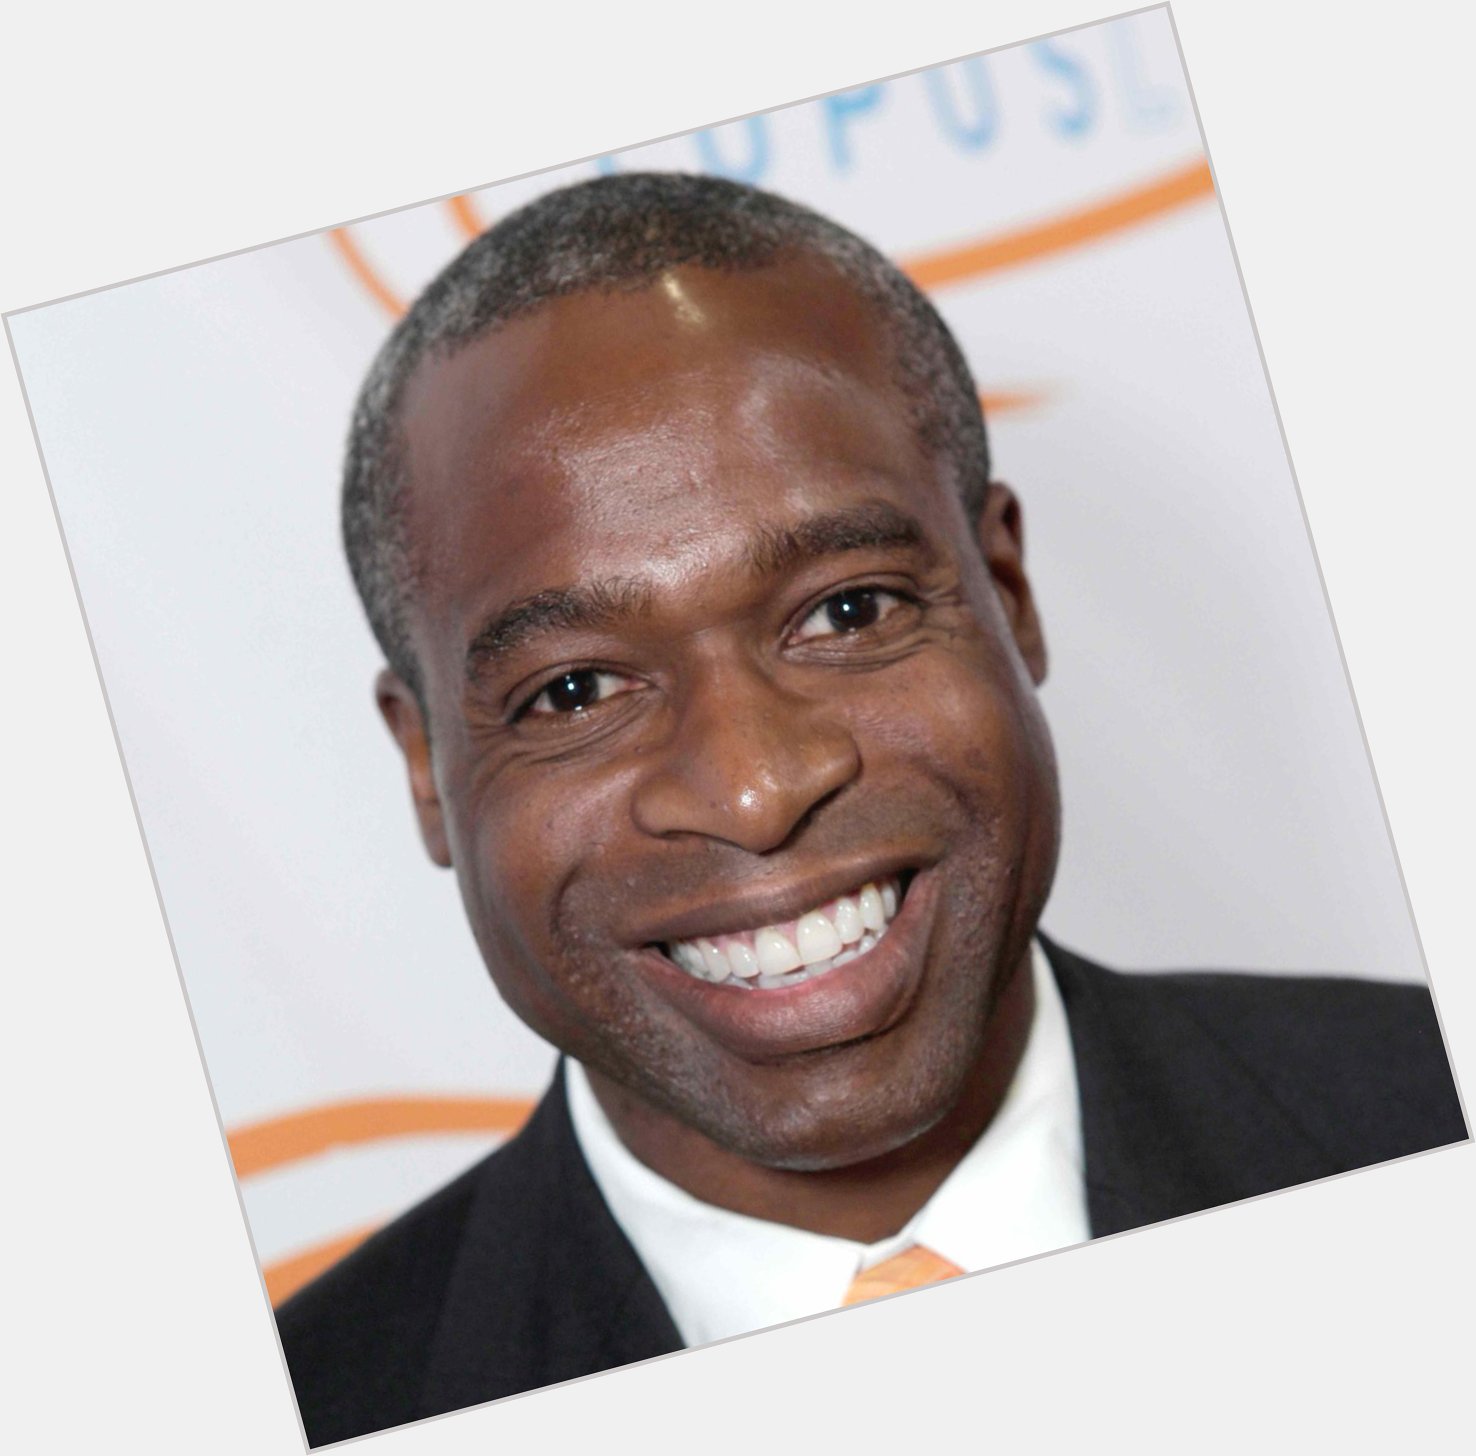 9/4: Happy 47th Birthday 2 actor/dir Phill Lewis! The Suite Life! Movies+ lots of TV!  